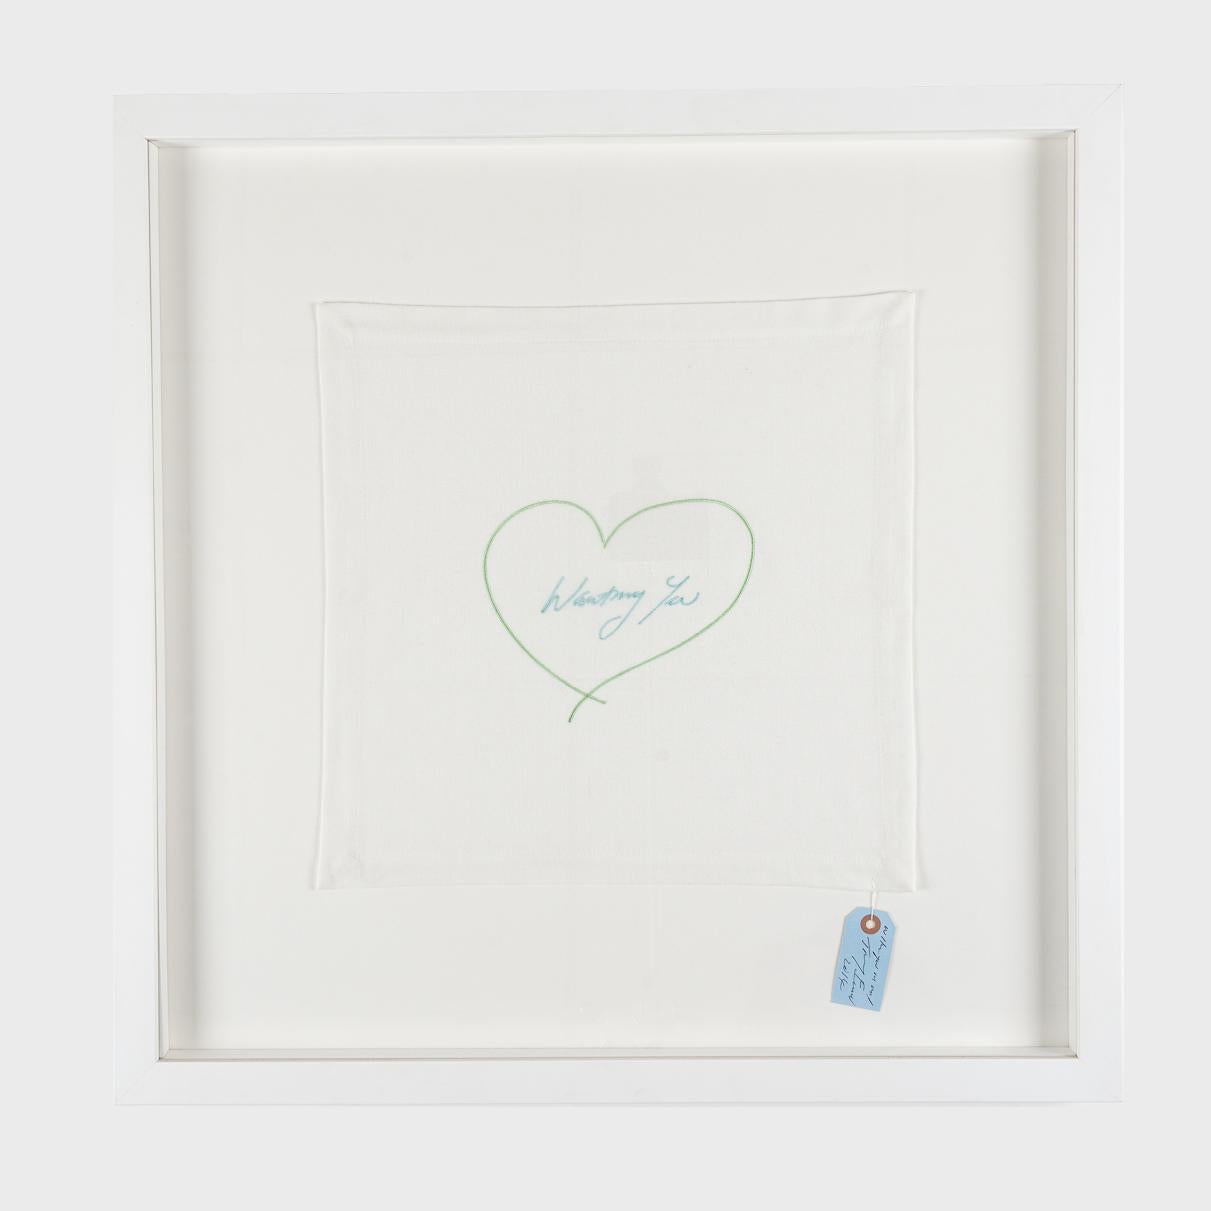 Wanting You, Napkin (Green and Blue) - Print by Tracey Emin